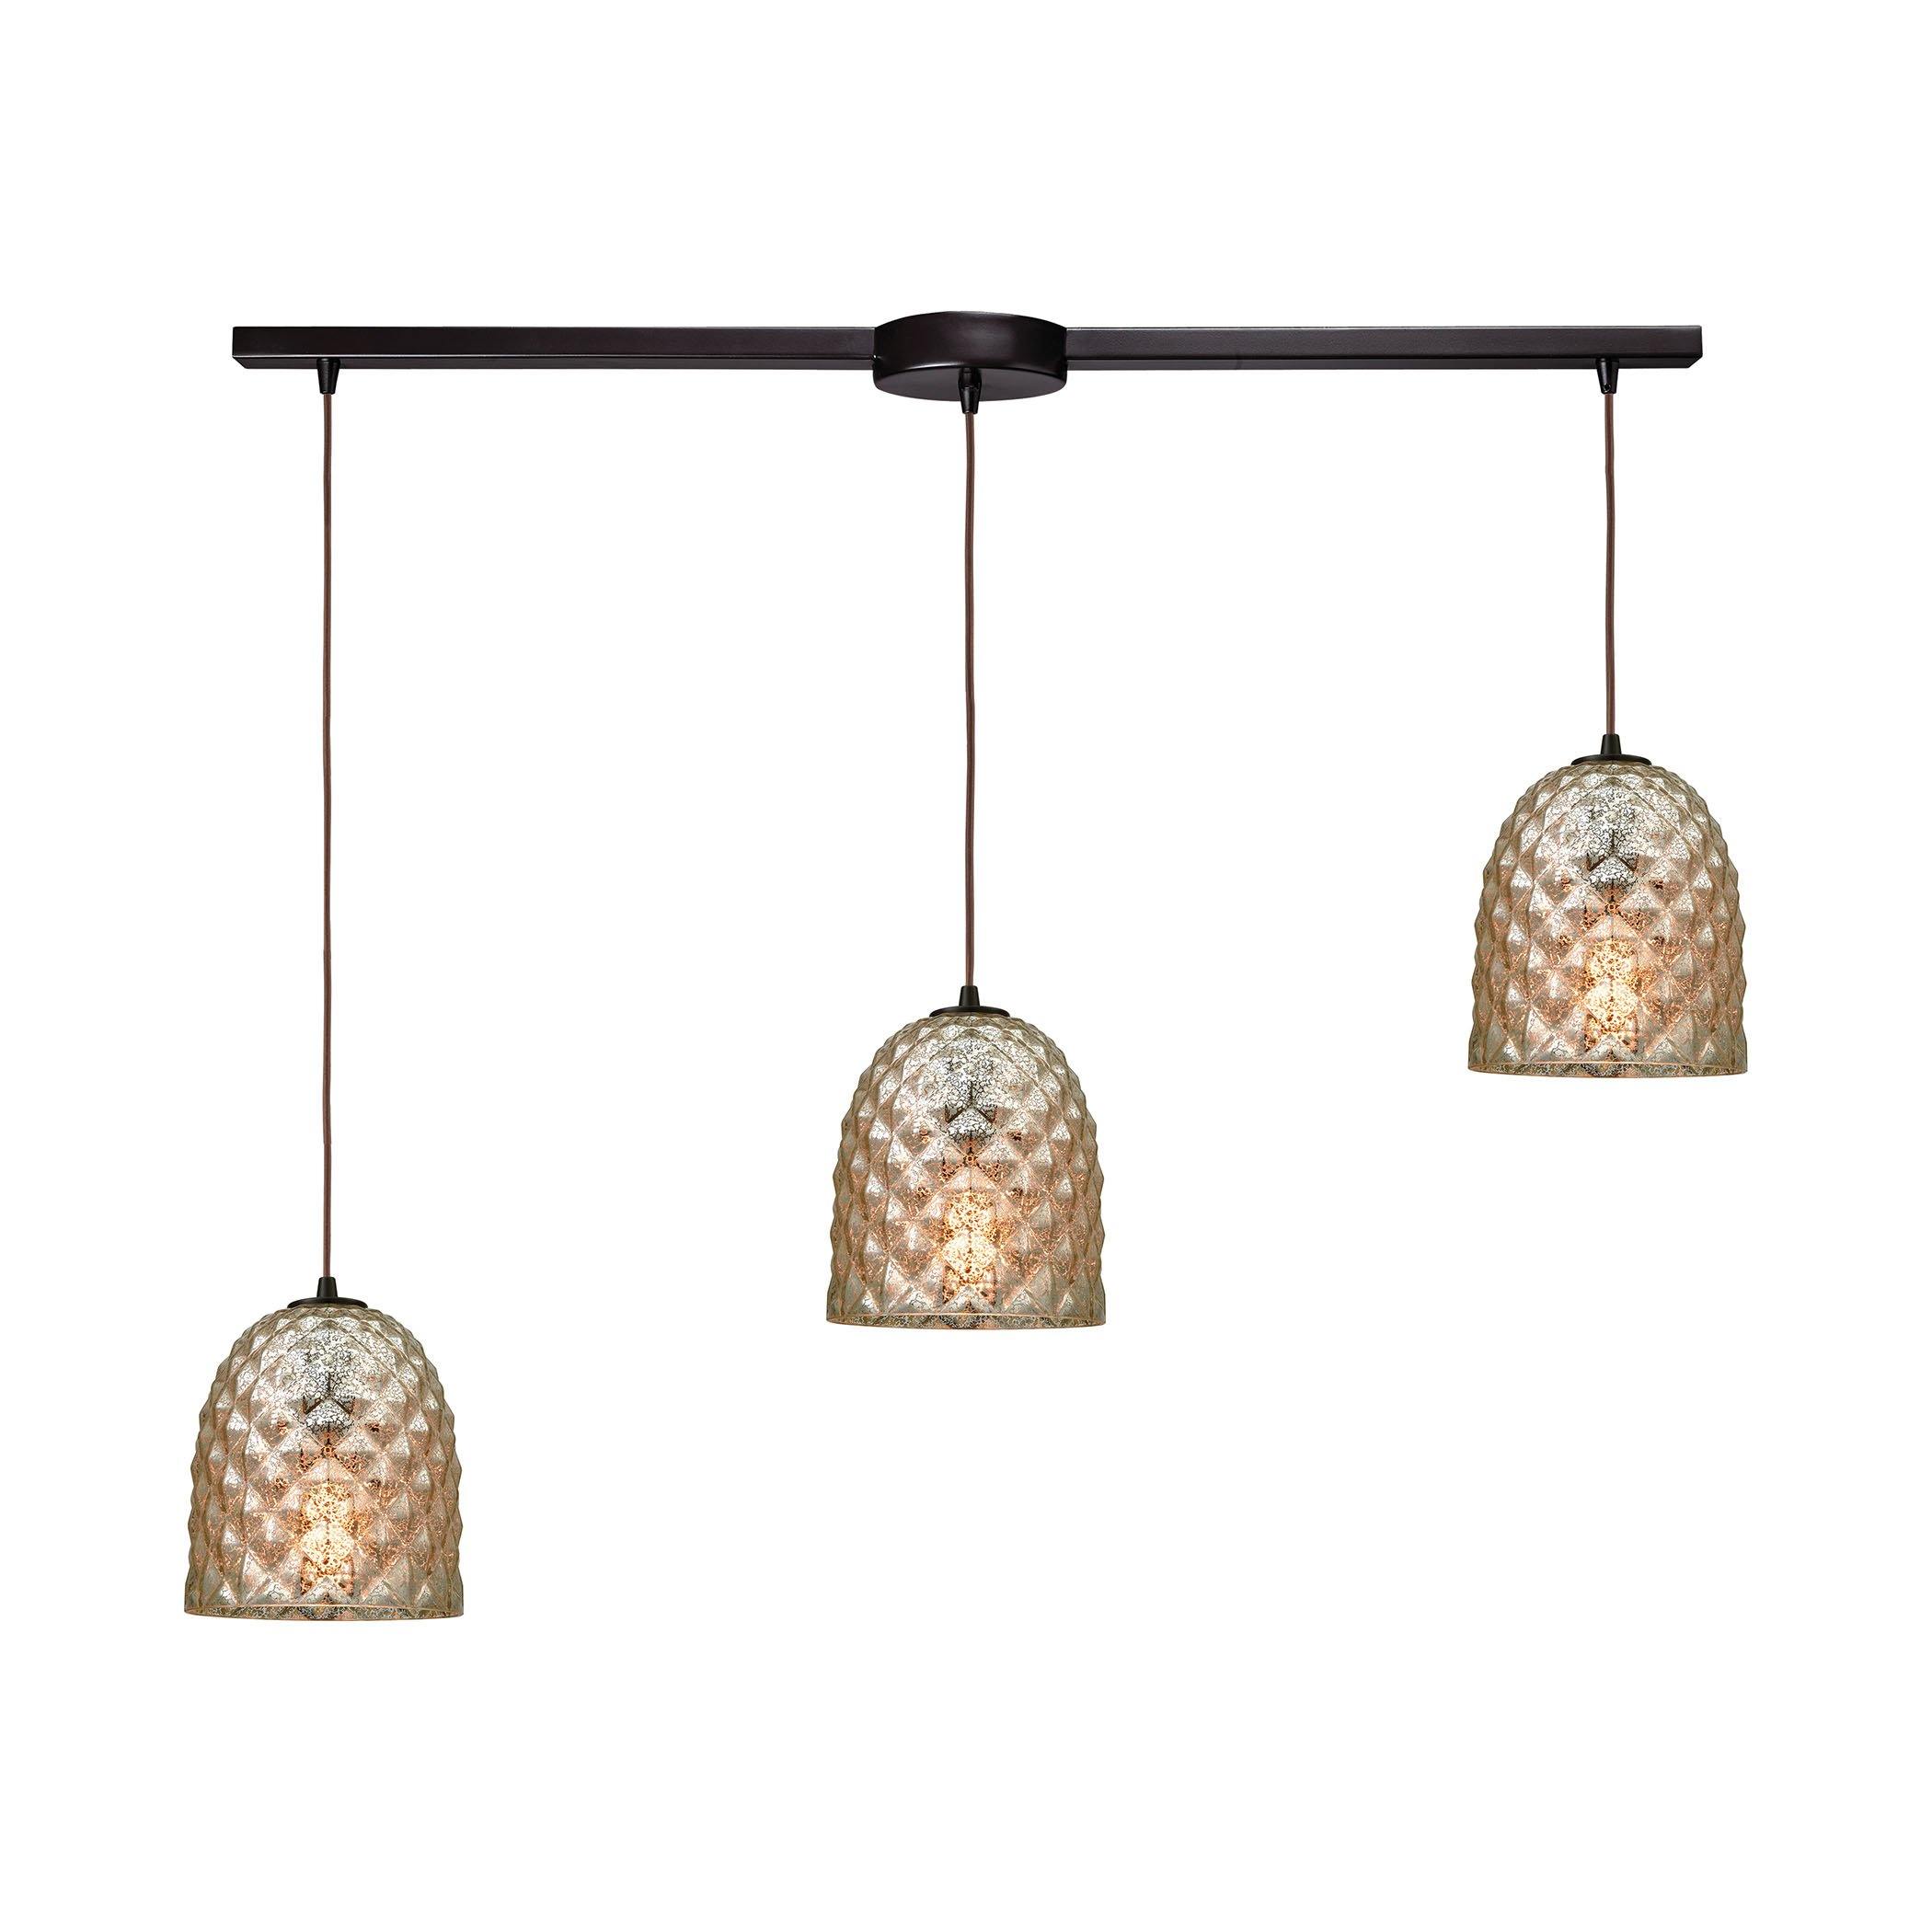 Brimley 3-Light Linear Bar In Oil Rubbed Bronze With Raised Diamond Texture Mercury Glass Pendant Ceiling Elk Lighting 